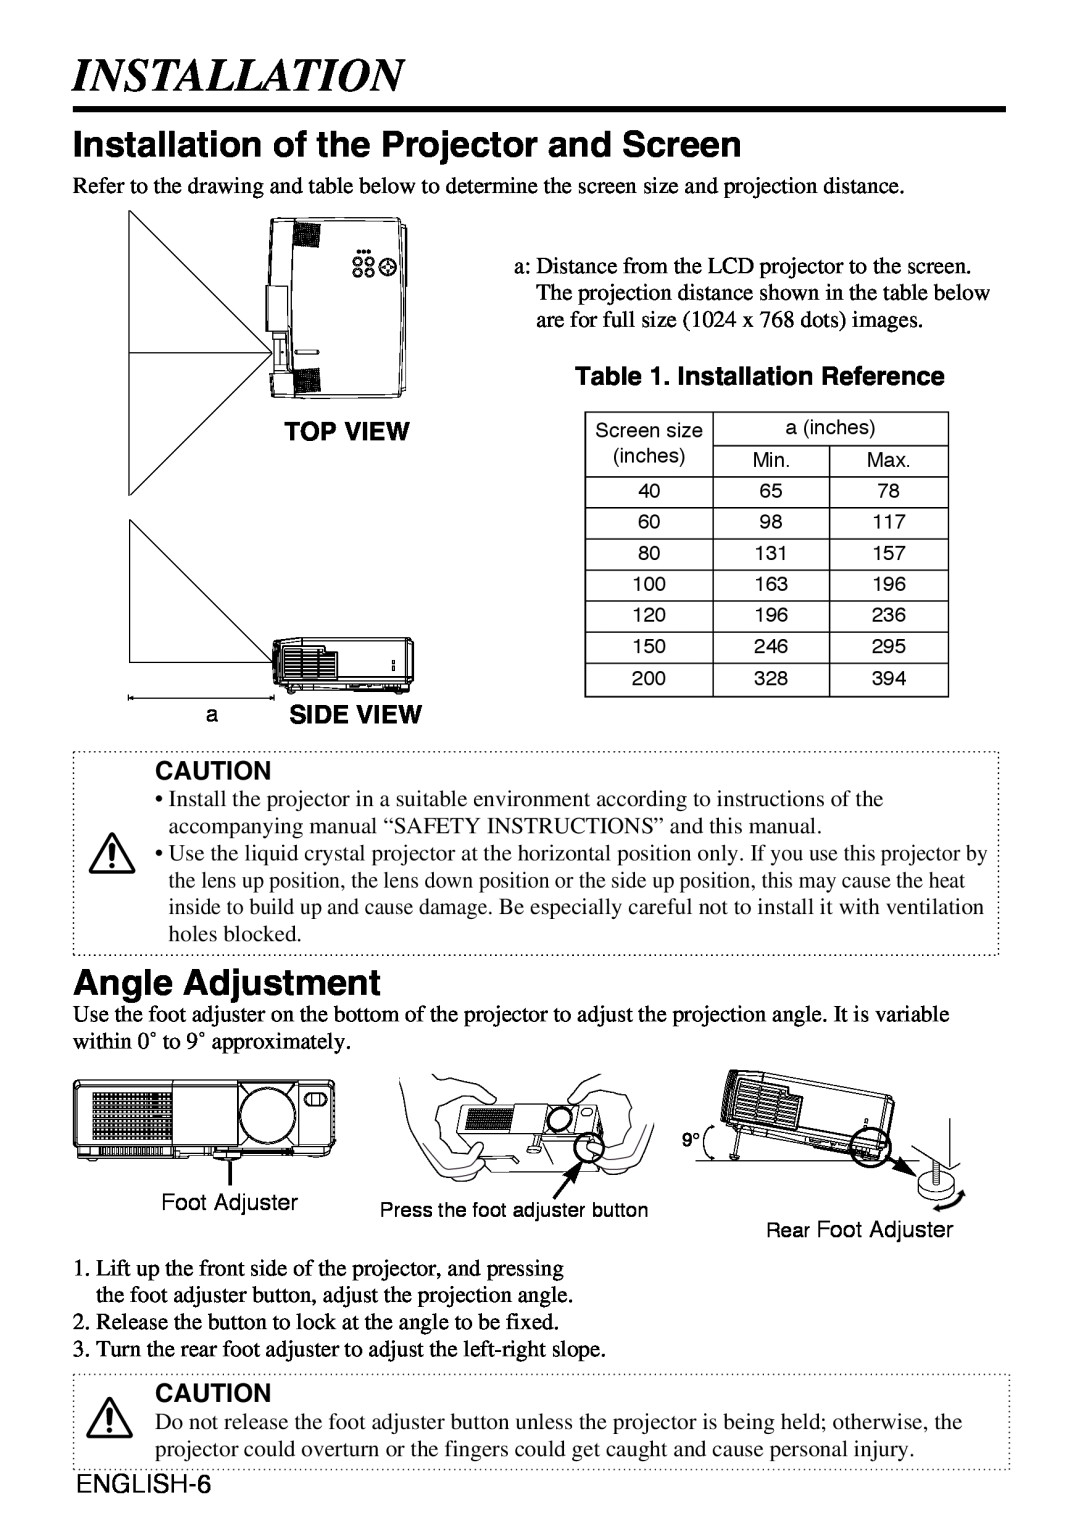 Grundig CP-731i user manual Installation of the Projector and Screen, Angle Adjustment, TOP VIEW a SIDE VIEW 